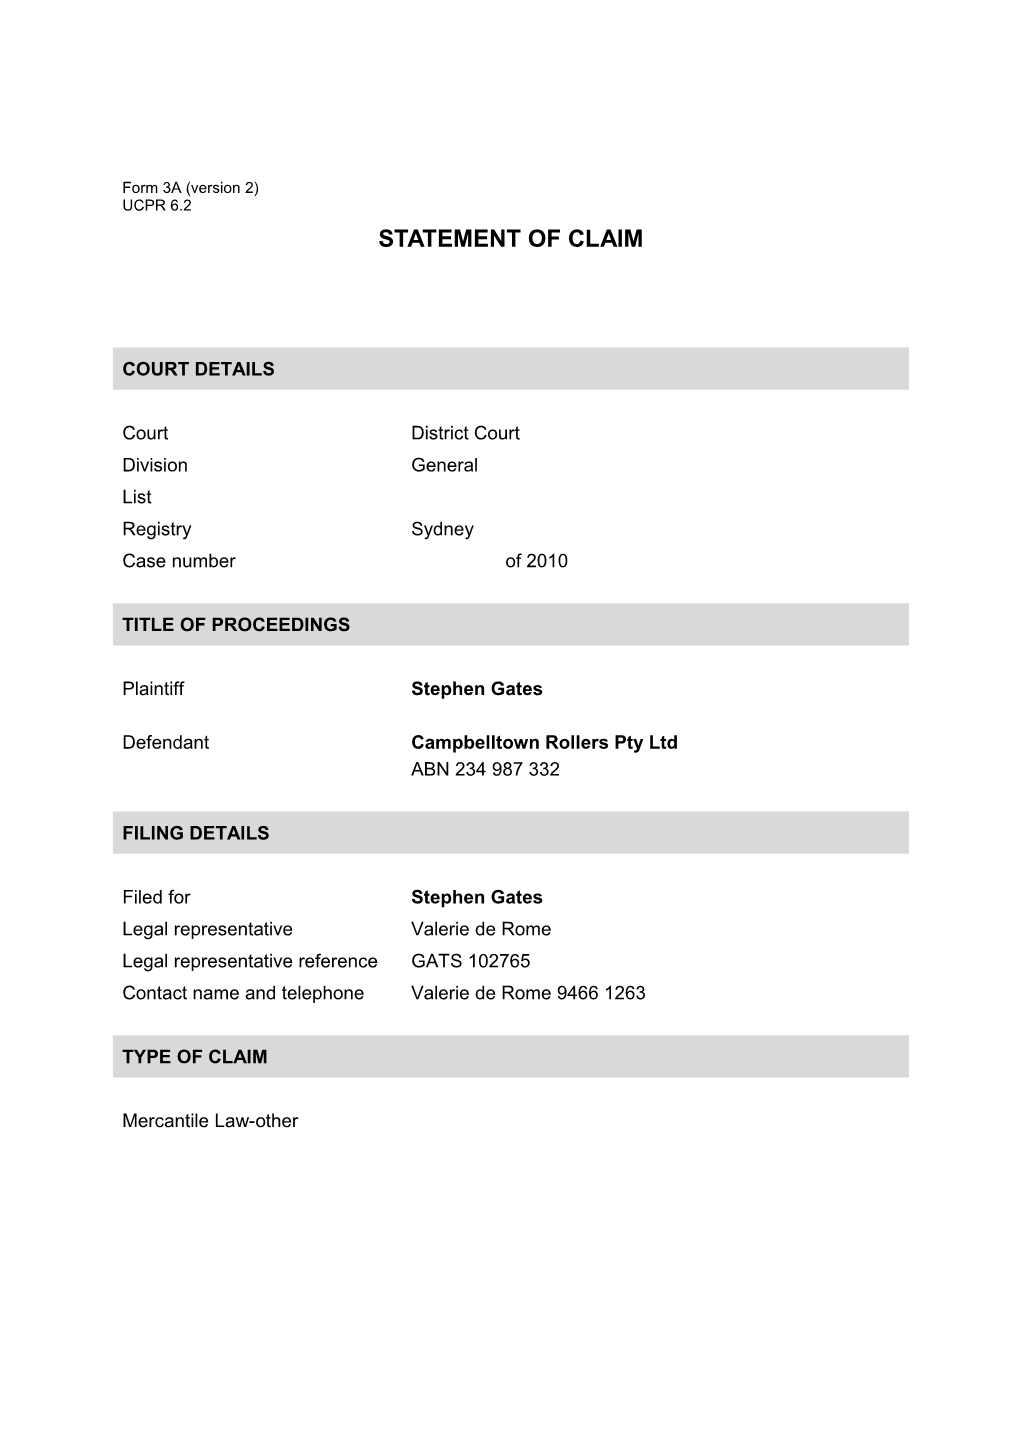 NSW UCPR Form 3A - Statement of Claim - Filing Party Legally Represented